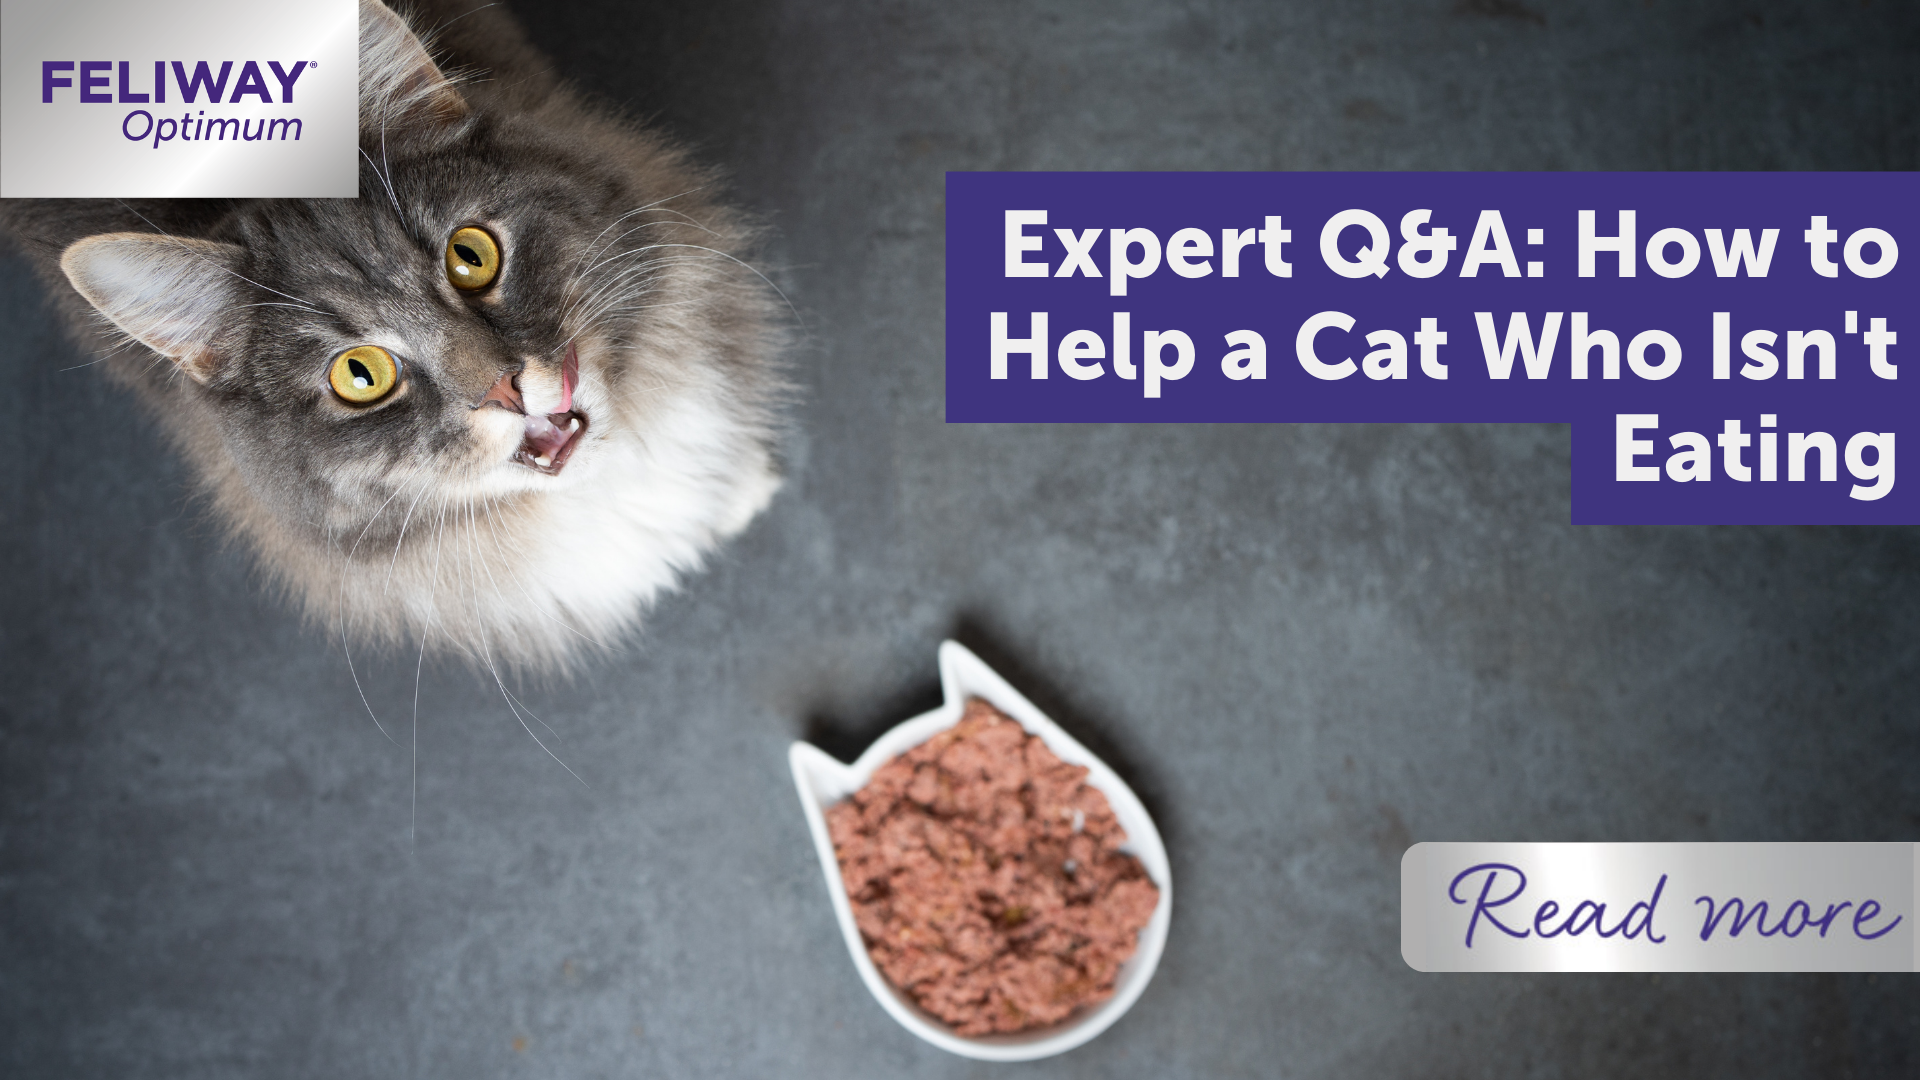 Expert Q&A: How to help a cat who isn't eating